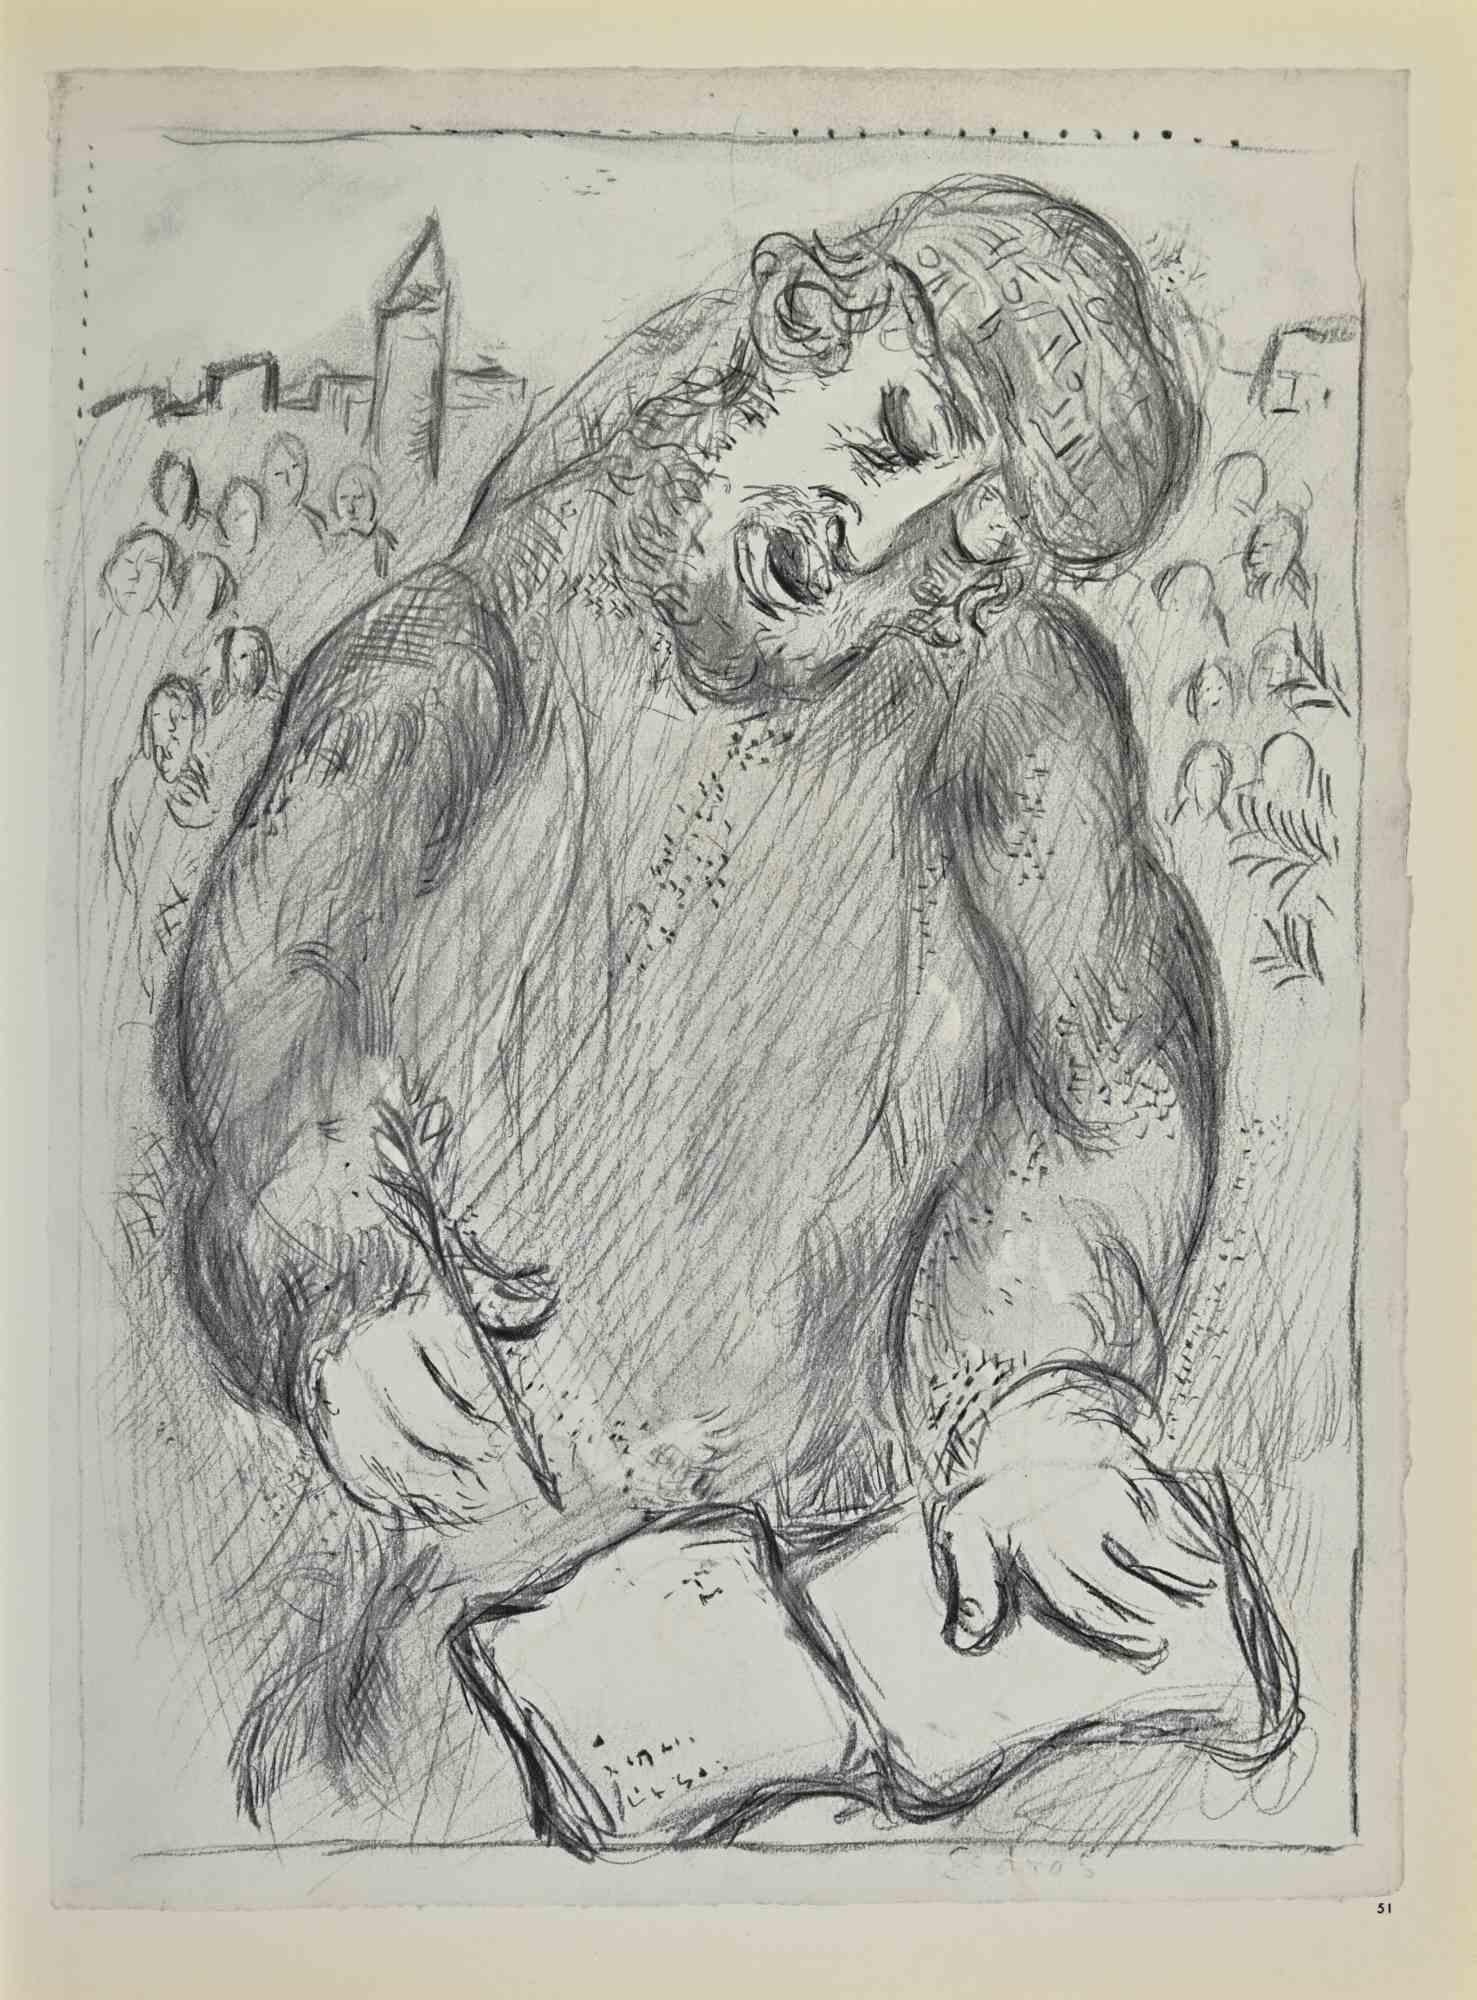 Ezra Teaches the People is an artwork realized by March Chagall, 1960s.

Lithograph on brown-toned paper, no signature.

Lithograph on both sheets.

Edition of 6500 unsigned lithographs. Printed by Mourlot and published by Tériade, Paris.

Ref.